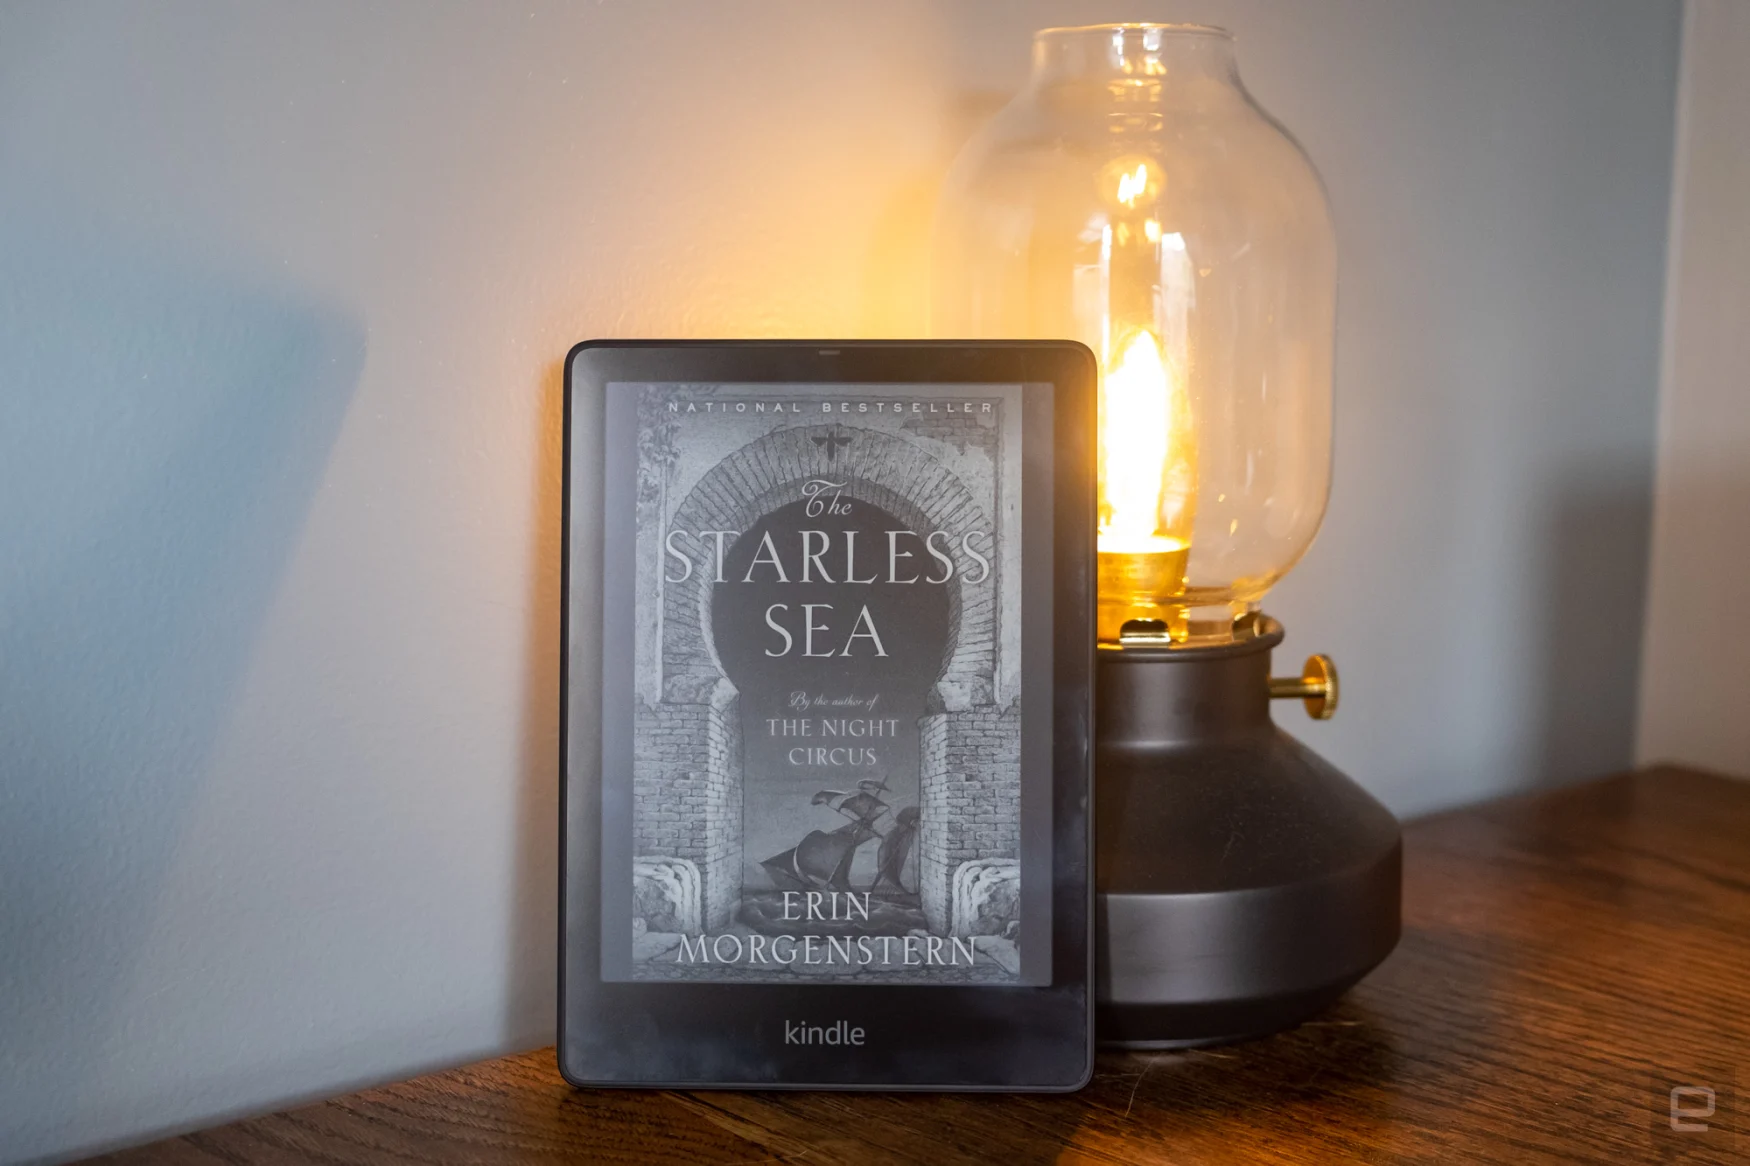 Kindle Paperwhite Signature Edition review: The best e-reader. Period. |  Engadget